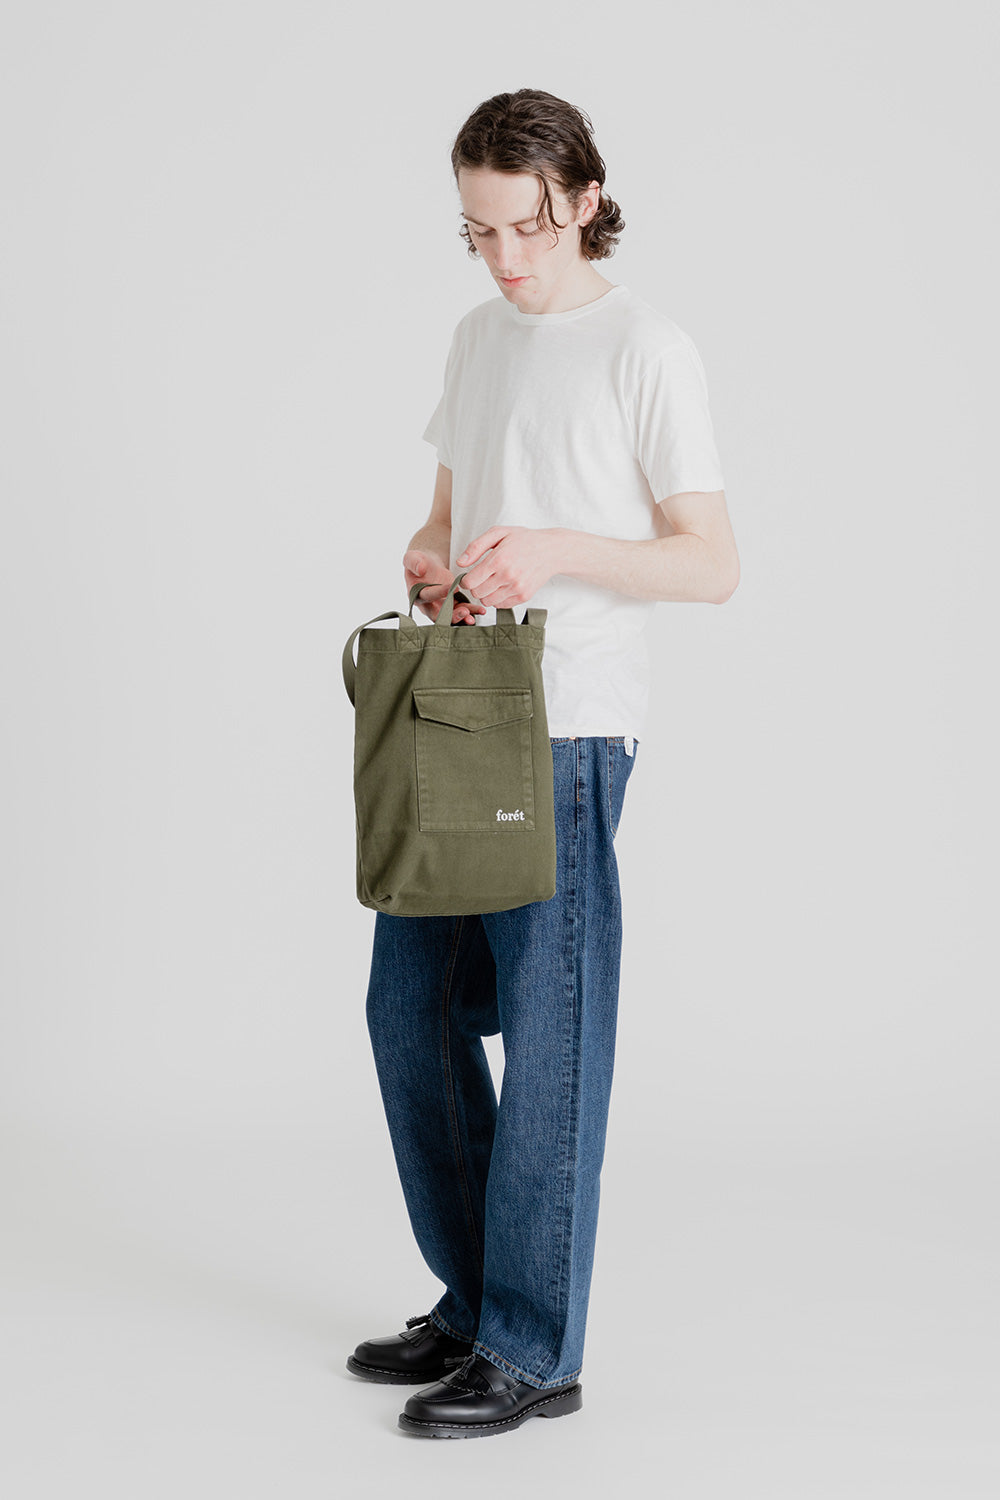 foret-turf-twill-tote-bag-army